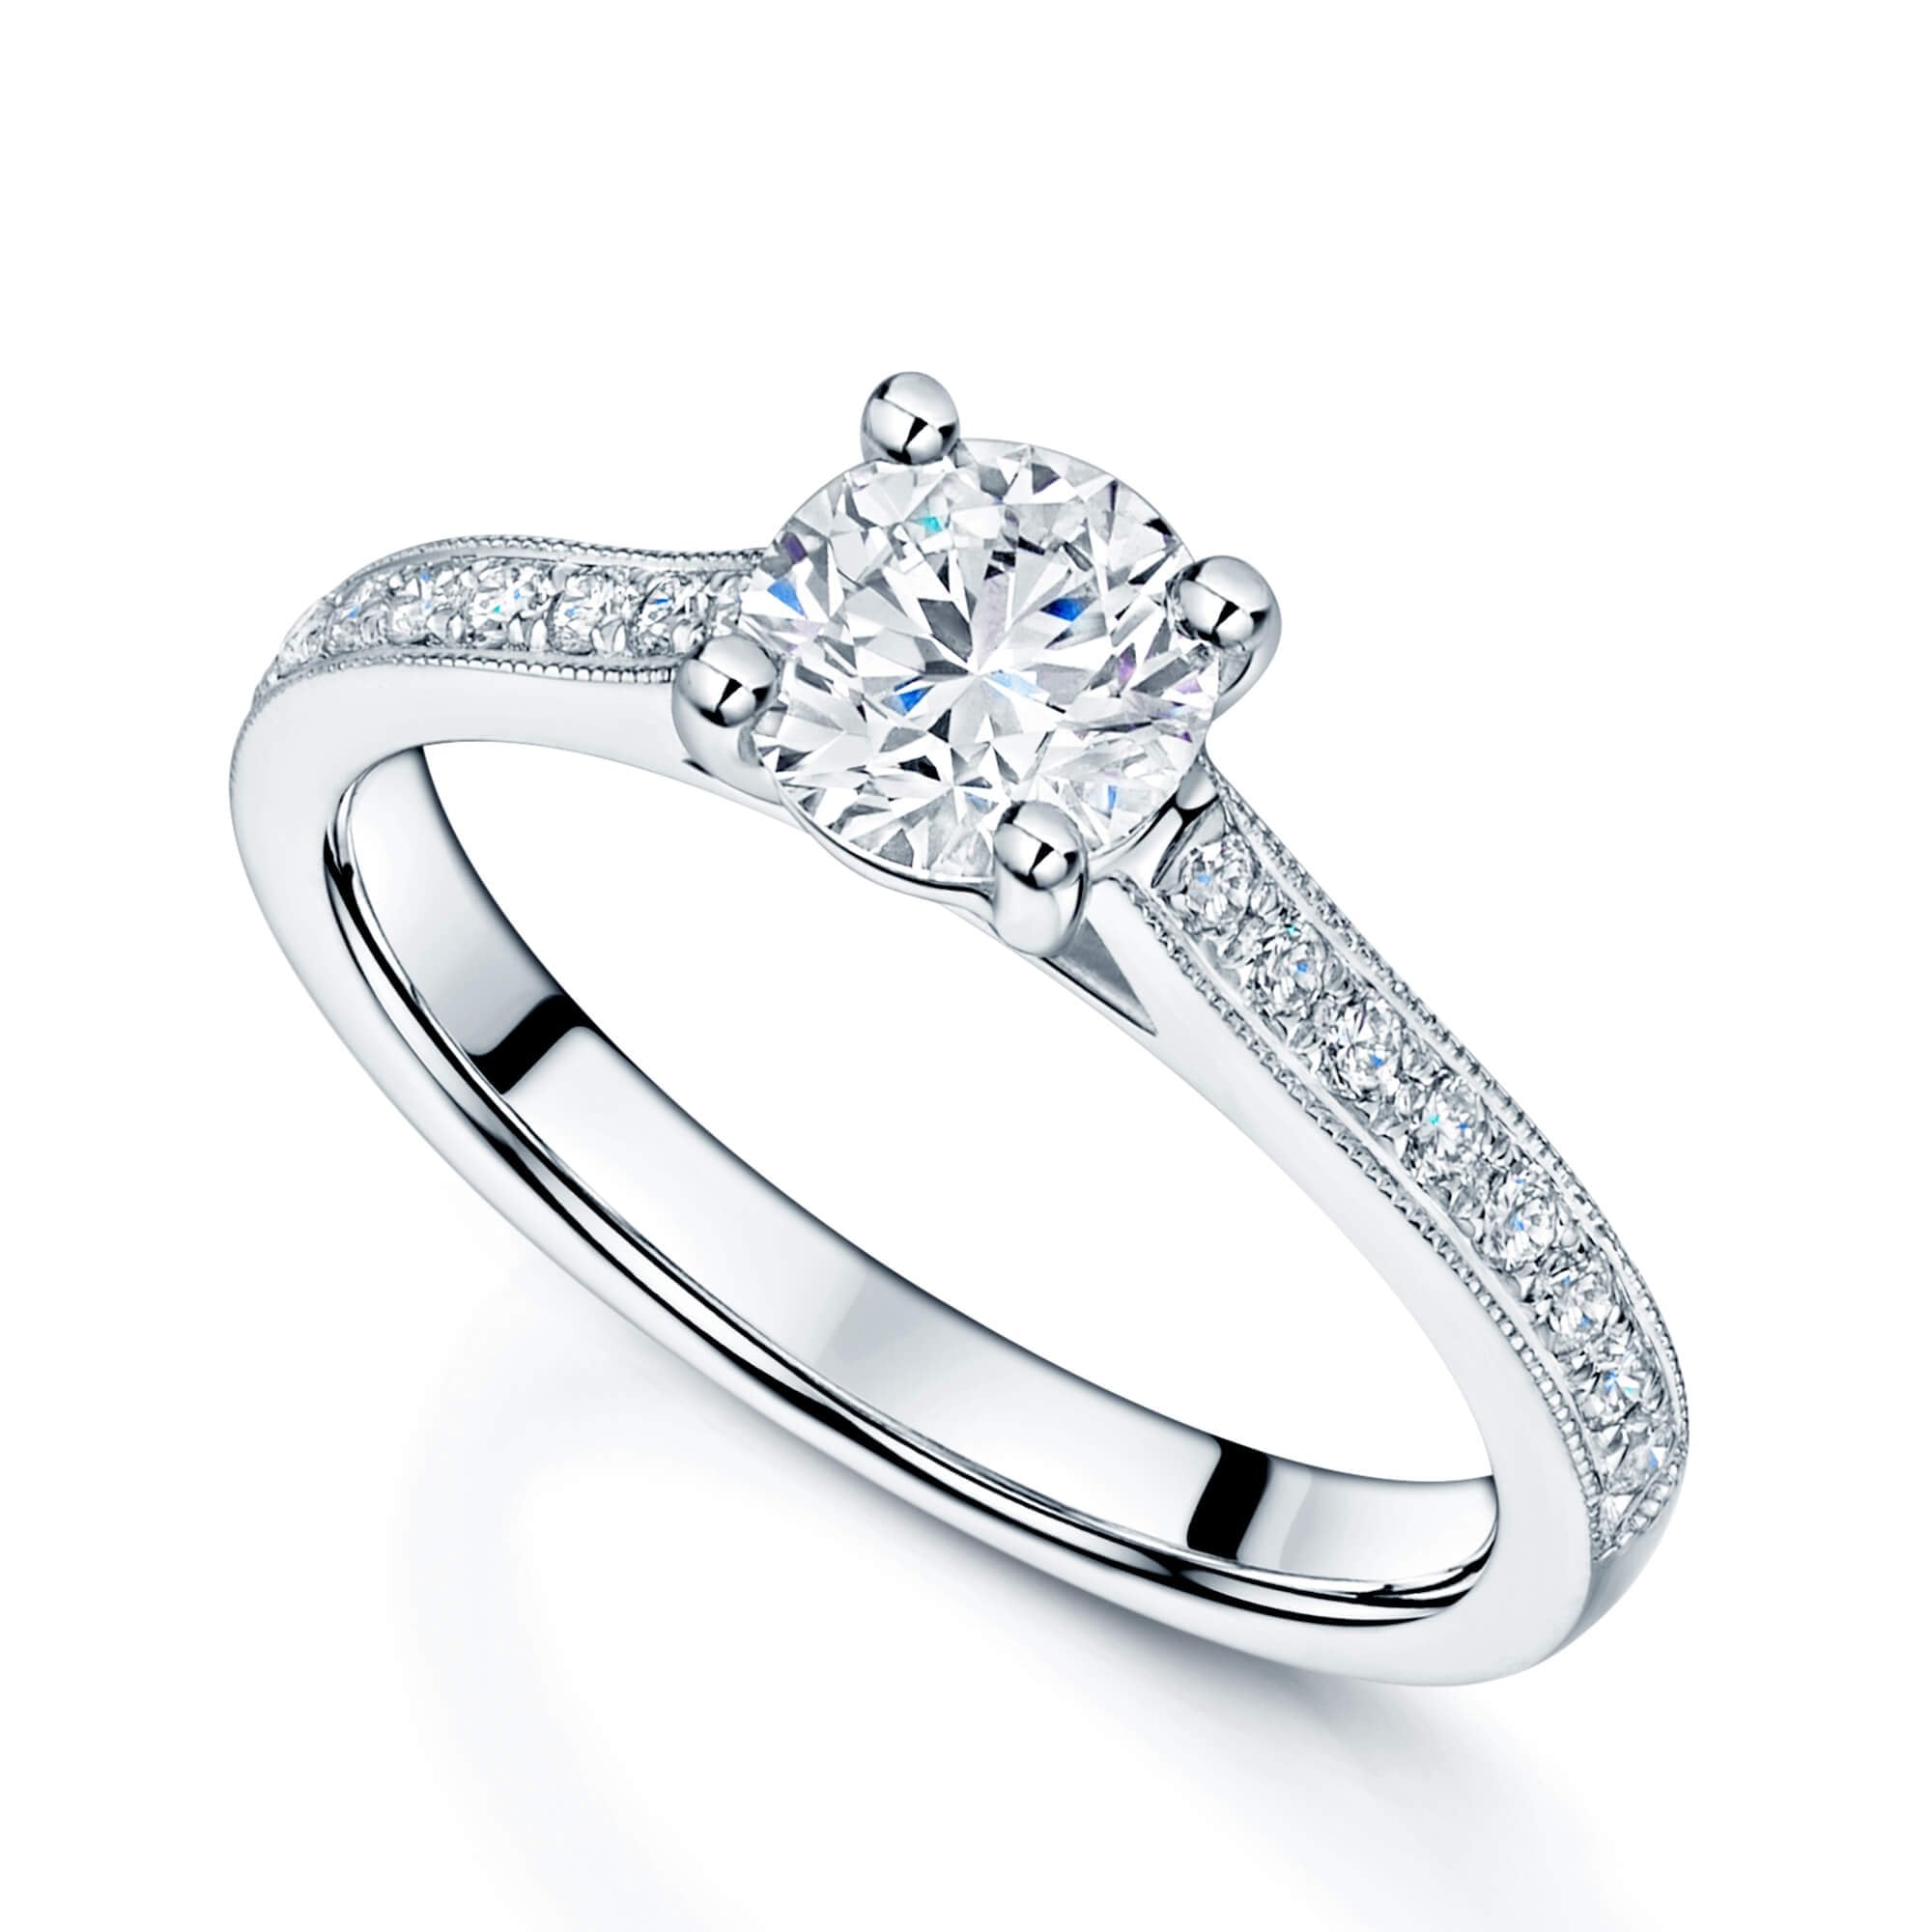 Platinum GIA Certificated Round Brilliant Cut Solitaire Ring With Diamond Set Shoulders